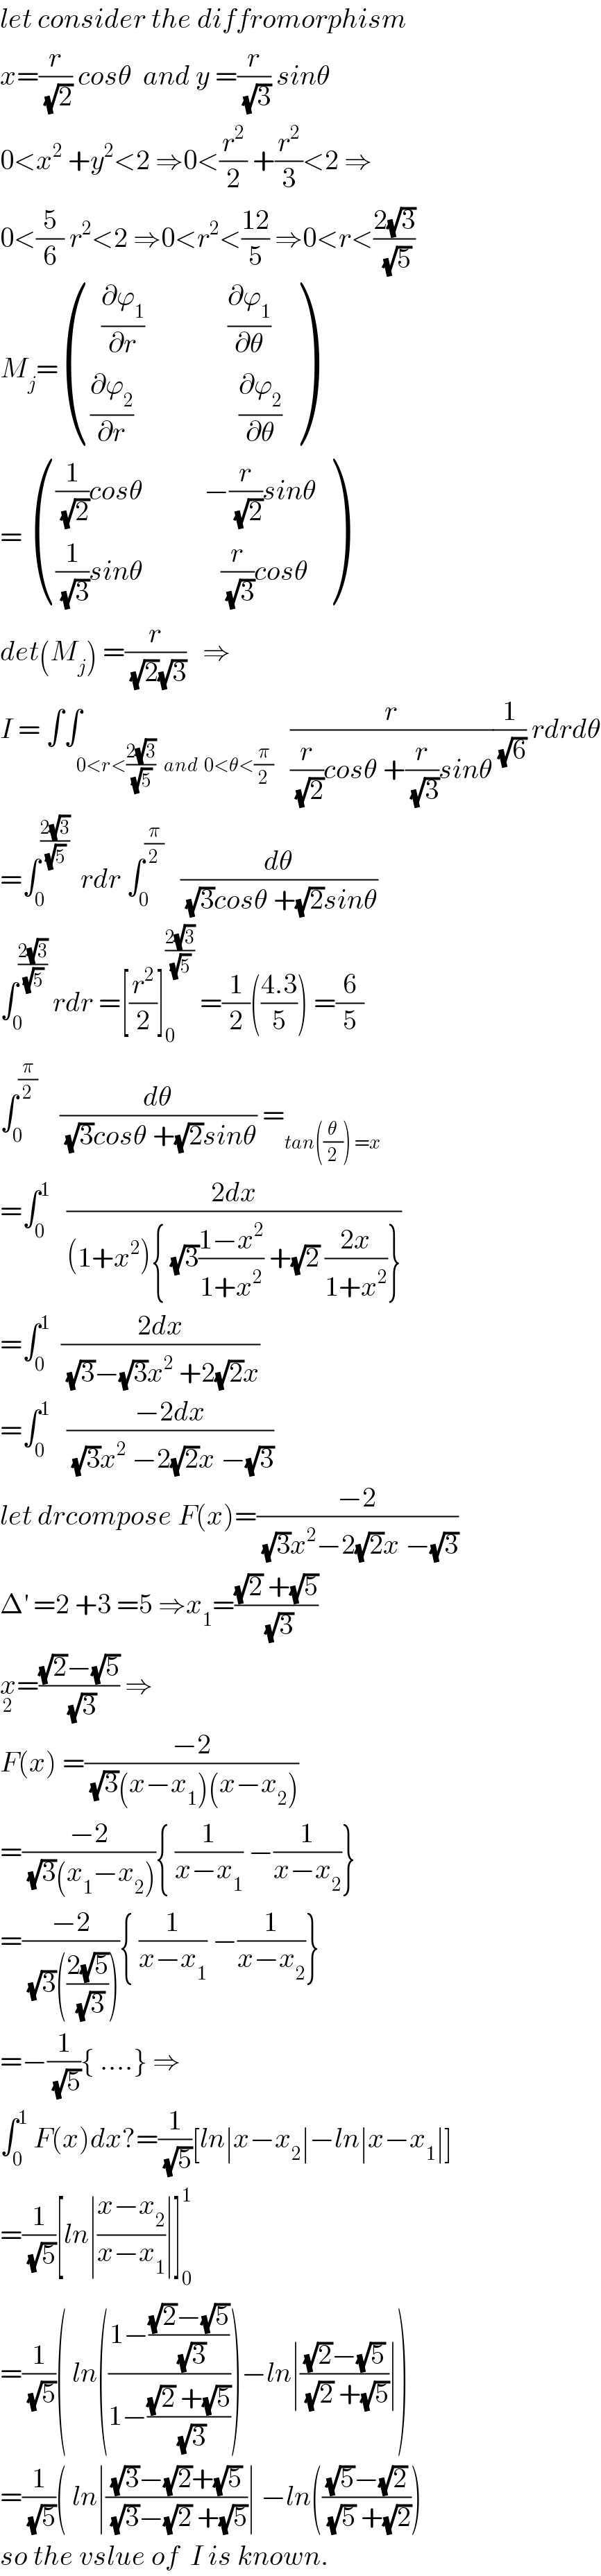 let consider the diffromorphism  x=(r/(√2)) cosθ  and y =(r/(√3)) sinθ  0<x^2  +y^2 <2 ⇒0<(r^2 /2) +(r^2 /3)<2 ⇒  0<(5/6) r^2 <2 ⇒0<r^2 <((12)/5) ⇒0<r<((2(√3))/(√5))  M_j = (((  (∂ϕ_1 /∂r)               (∂ϕ_1 /∂θ))),(((∂ϕ_2 /∂r)                   (∂ϕ_2 /∂θ))) )  =  ((((1/(√2))cosθ           −(r/(√2))sinθ)),(((1/(√3))sinθ              (r/(√3))cosθ)) )  det(M_j ) =(r/((√2)(√3)))   ⇒  I = ∫∫_(0<r<((2(√3))/(√5))   and  0<θ<(π/2))   (r/((r/(√2))cosθ +(r/(√3))sinθ))(1/(√6)) rdrdθ  =∫_0 ^((2(√3))/(√5))   rdr ∫_0 ^(π/2)    (dθ/((√3)cosθ +(√2)sinθ))  ∫_0 ^((2(√3))/(√5))  rdr =[(r^2 /2)]_0 ^((2(√3))/(√5))  =(1/2)(((4.3)/5)) =(6/5)  ∫_0 ^(π/2)     (dθ/((√3)cosθ +(√2)sinθ)) =_(tan((θ/2)) =x)   =∫_0 ^1    ((2dx)/((1+x^2 ){ (√3)((1−x^2 )/(1+x^2 )) +(√2) ((2x)/(1+x^2 ))}))  =∫_0 ^1   ((2dx)/((√3)−(√3)x^2  +2(√2)x))  =∫_0 ^1    ((−2dx)/((√3)x^2  −2(√2)x −(√3)))  let drcompose F(x)=((−2)/((√3)x^2 −2(√2)x −(√3)))  Δ^′  =2 +3 =5 ⇒x_1 =(((√2) +(√5))/(√3))  x_2 =(((√2)−(√5))/(√3)) ⇒  F(x) =((−2)/((√3)(x−x_1 )(x−x_2 )))  =((−2)/((√3)(x_1 −x_2 ))){ (1/(x−x_1 )) −(1/(x−x_2 ))}  =((−2)/((√3)(((2(√5))/(√3))))){ (1/(x−x_1 )) −(1/(x−x_2 ))}  =−(1/(√5)){ ....} ⇒  ∫_0 ^1  F(x)dx?=(1/(√5))[ln∣x−x_2 ∣−ln∣x−x_1 ∣]  =(1/(√5))[ln∣((x−x_2 )/(x−x_1 ))∣]_0 ^1   =(1/(√5))( ln(((1−(((√2)−(√5))/(√3)))/(1−(((√2) +(√5))/(√3)))))−ln∣(((√2)−(√5))/((√2) +(√5)))∣)  =(1/(√5))( ln∣(((√3)−(√2)+(√5))/((√3)−(√2) +(√5)))∣ −ln((((√5)−(√2))/((√5) +(√2))))  so the vslue of  I is known.  